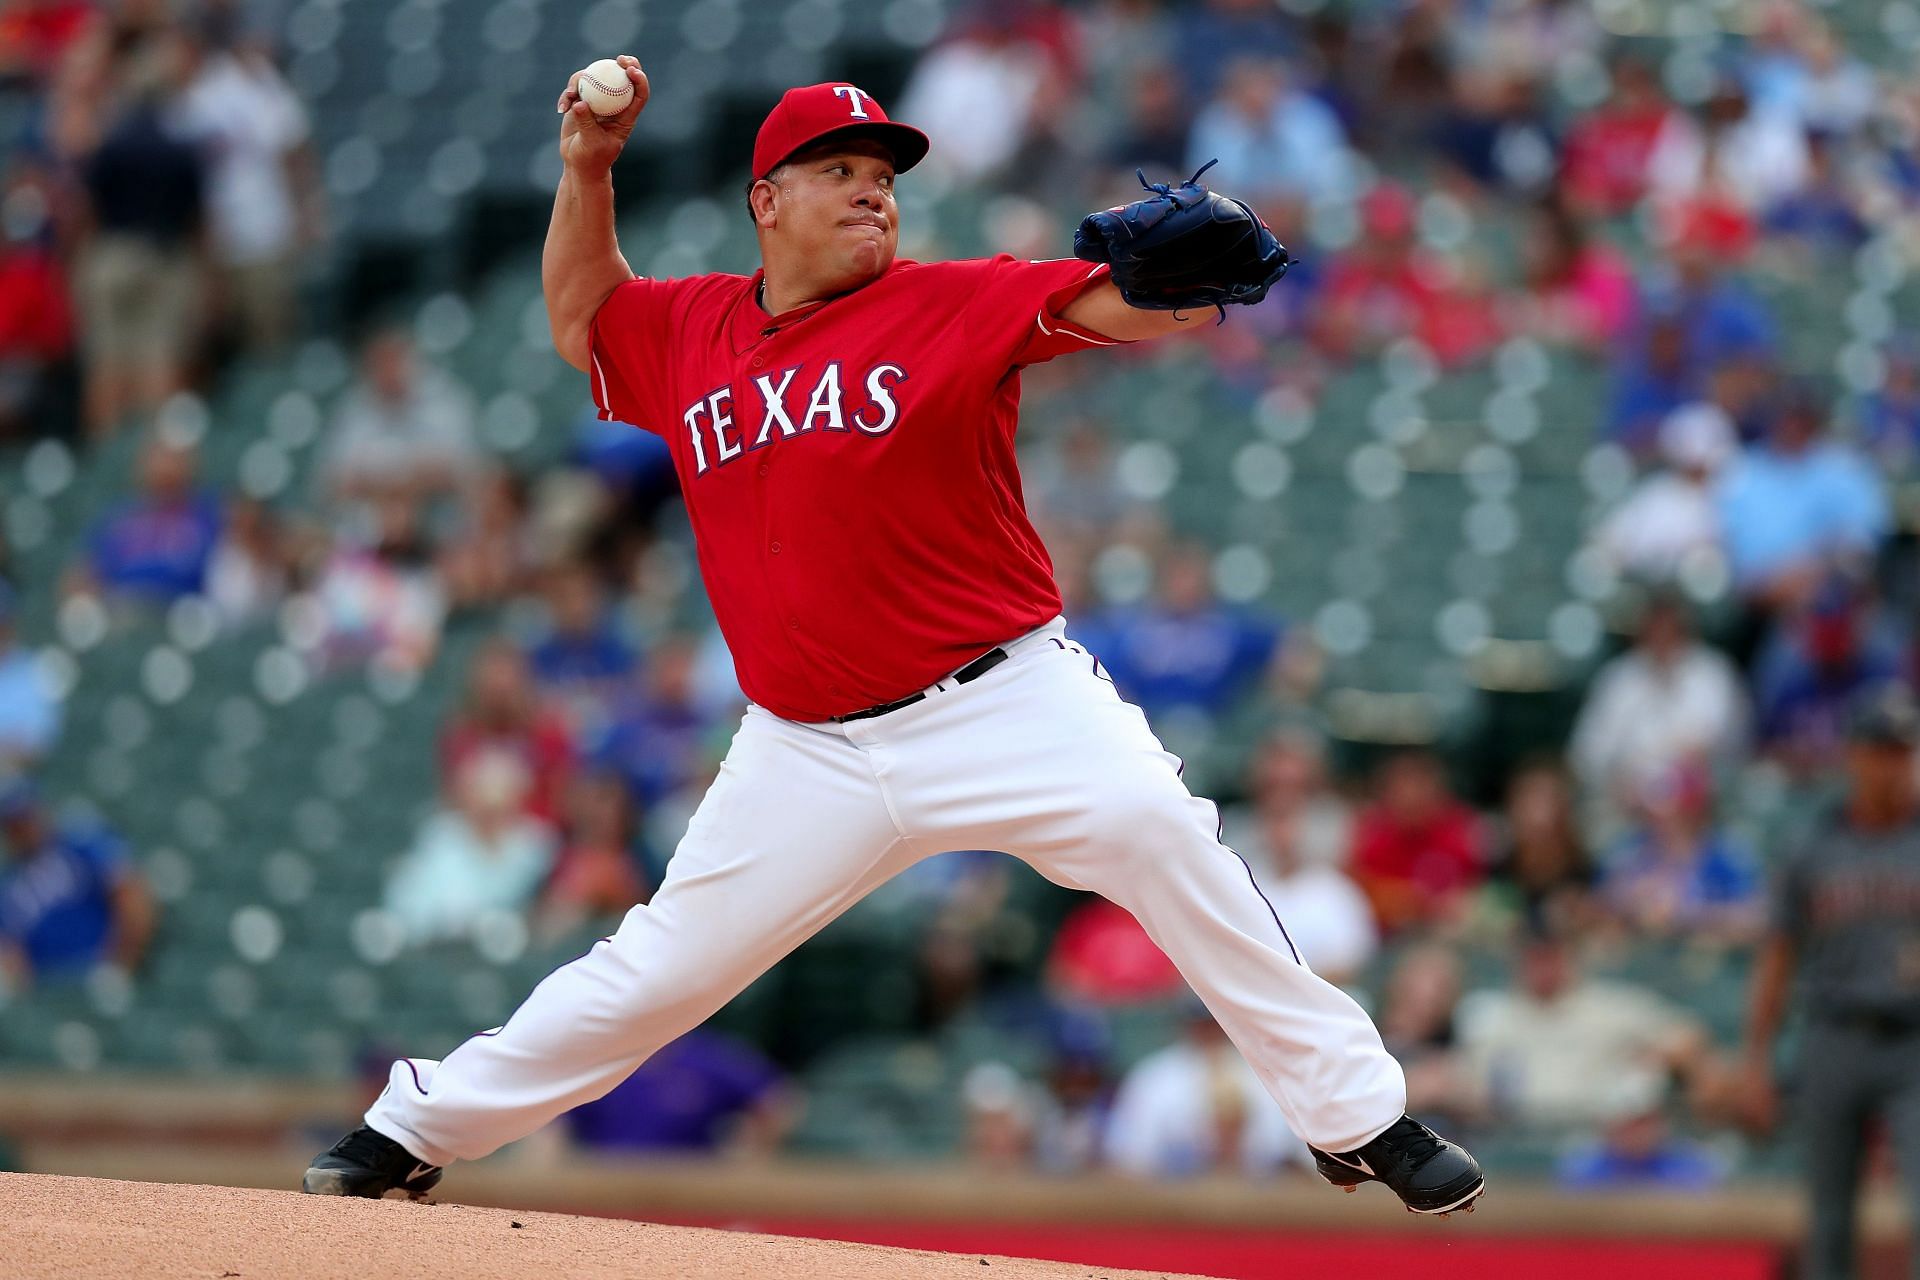 The Twins are hosting 'Big Sexy Night' -- yes, in honor of Bartolo Colon